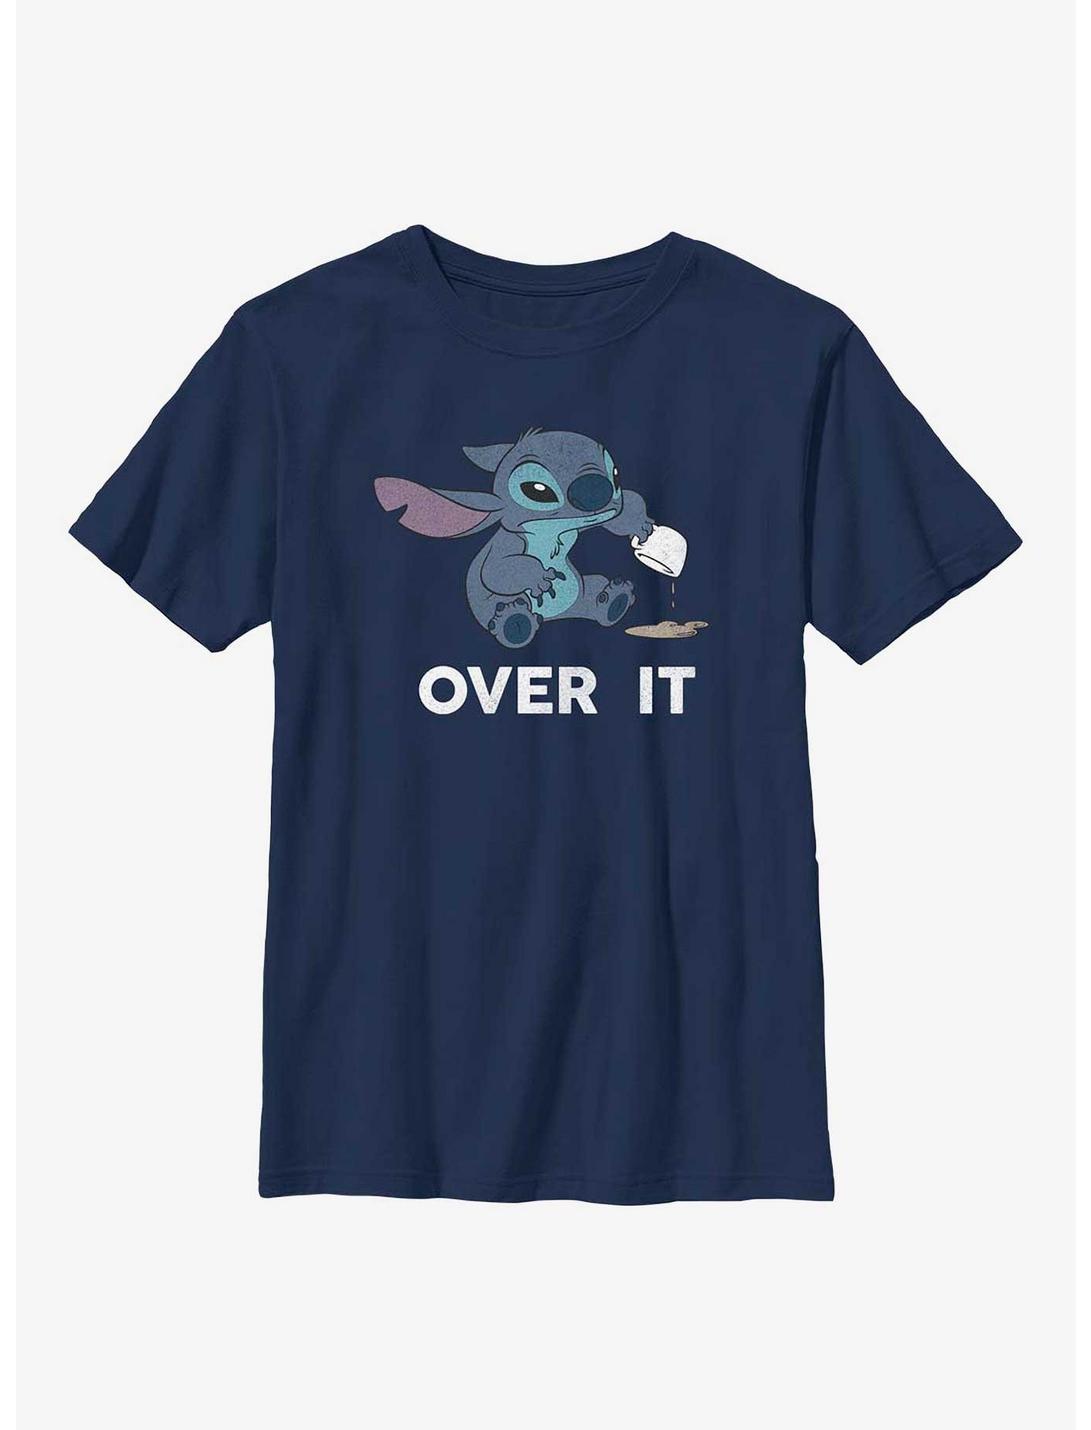 Disney Lilo & Stitch Over It Youth T-Shirt, NAVY, hi-res